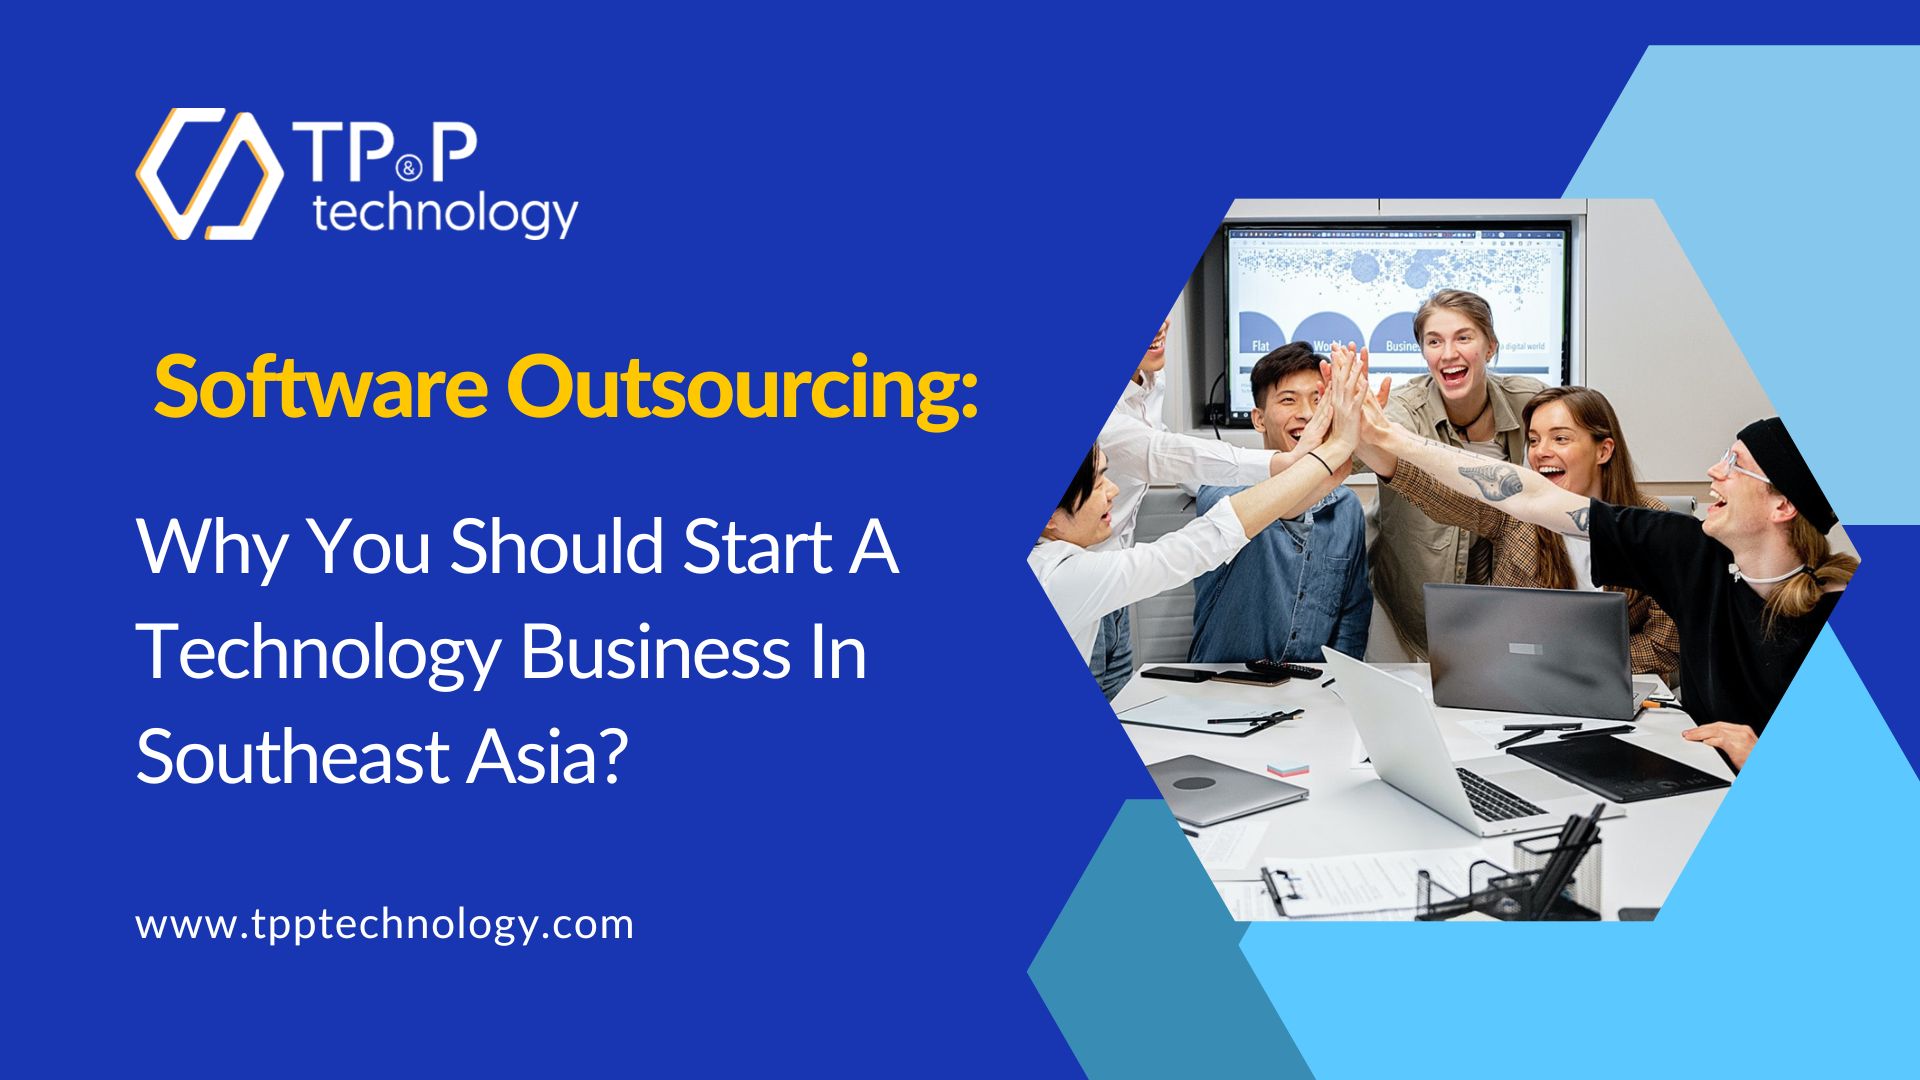  Software Outsourcing: Why You Should Start Technology Business In Southeast Asia?